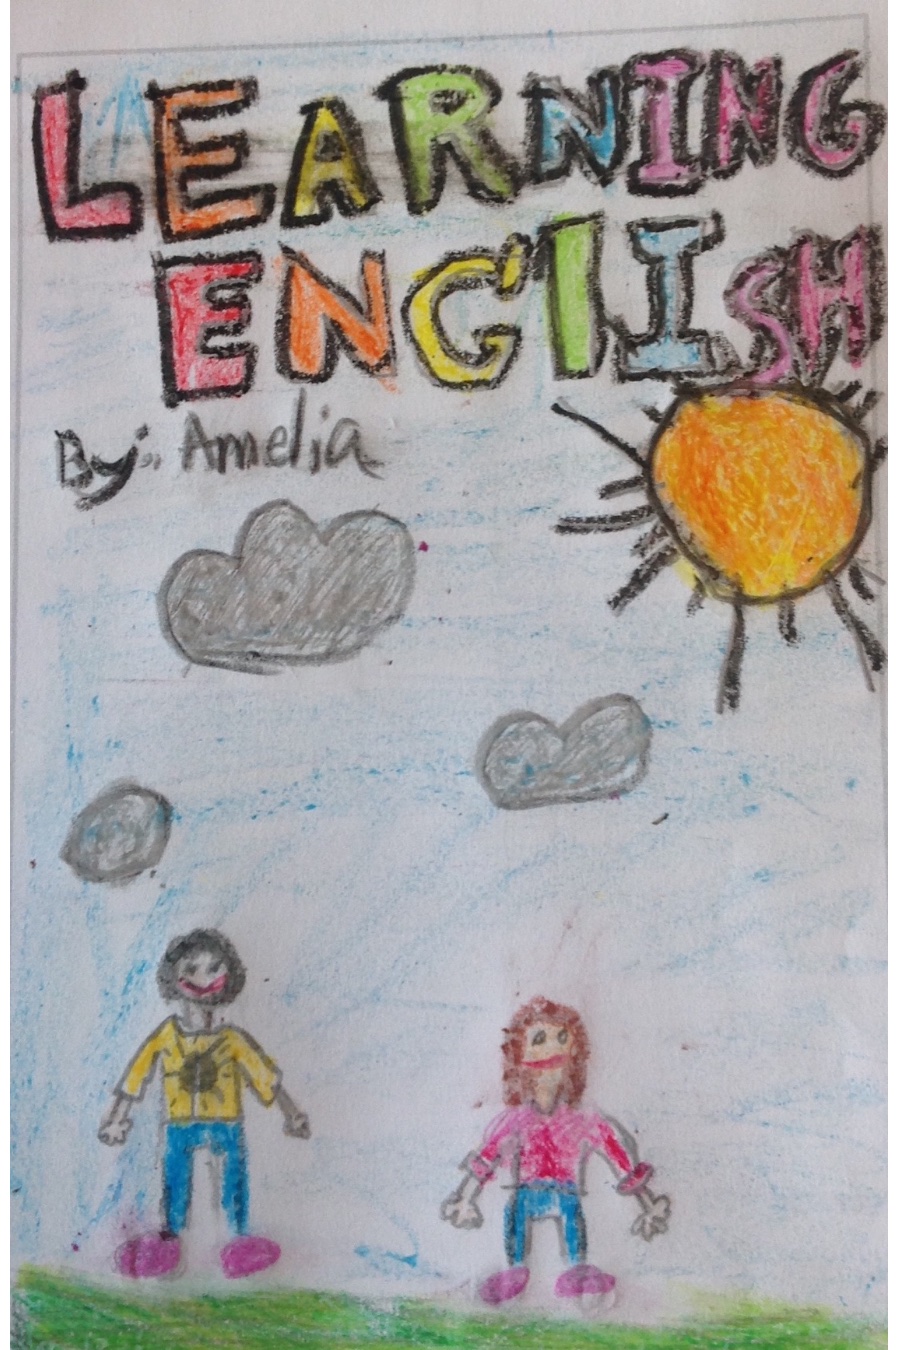 Learning English by Amelia G